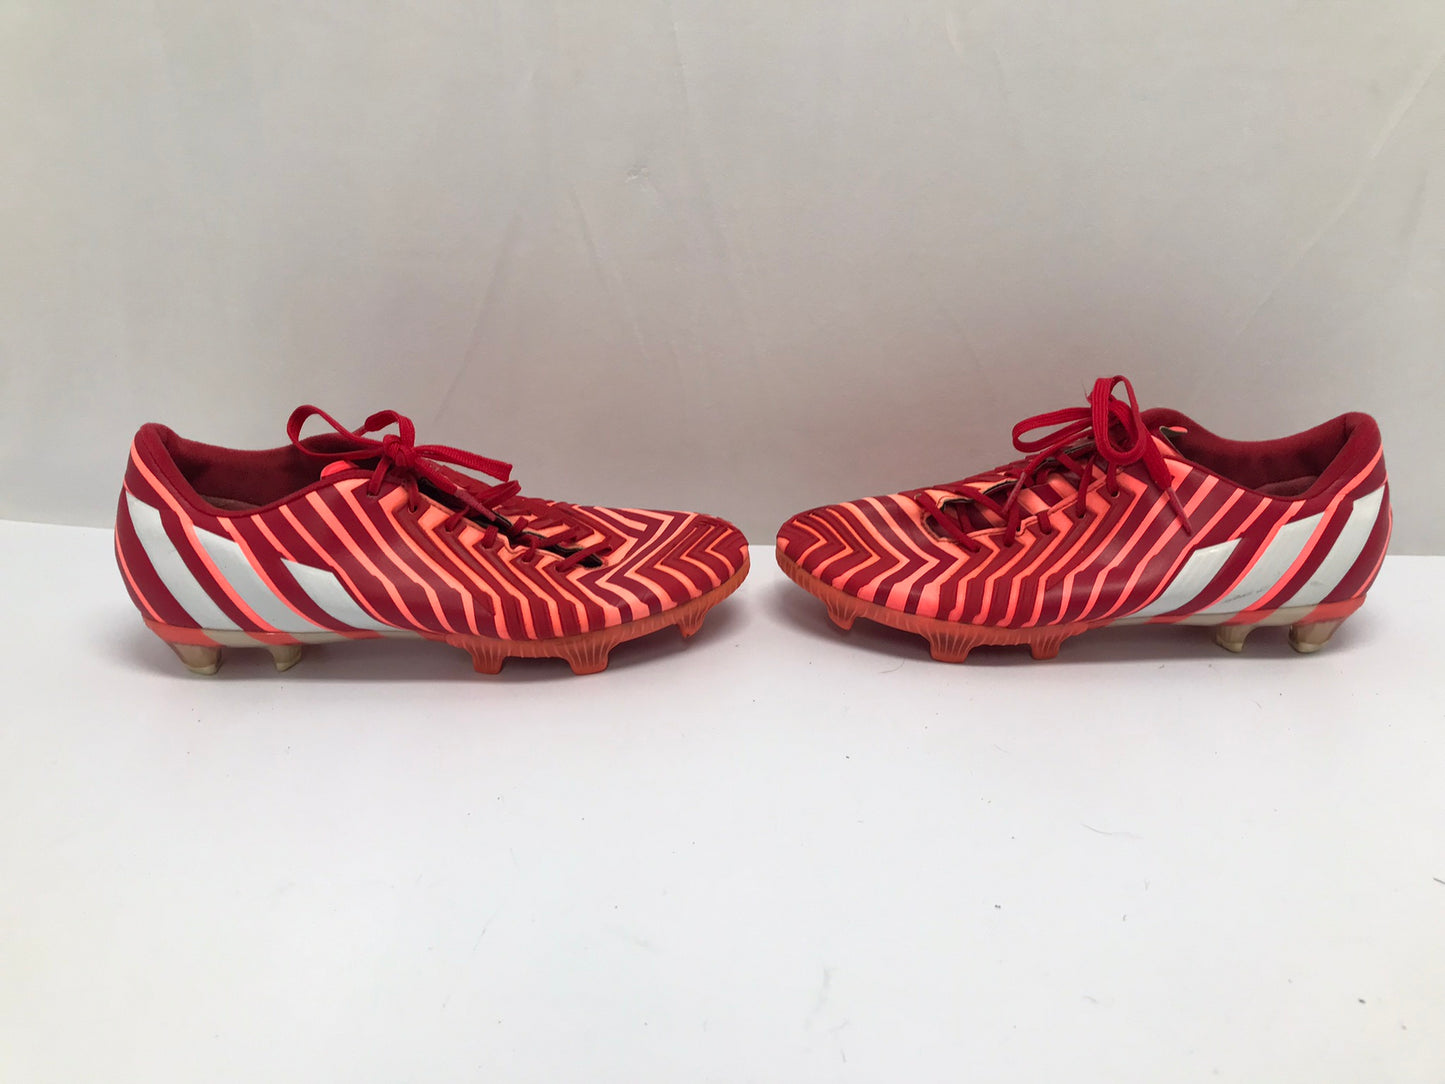 Soccer Shoes Cleats Men's Size 7.5 Adidas Predator Red Tangerine Excellent